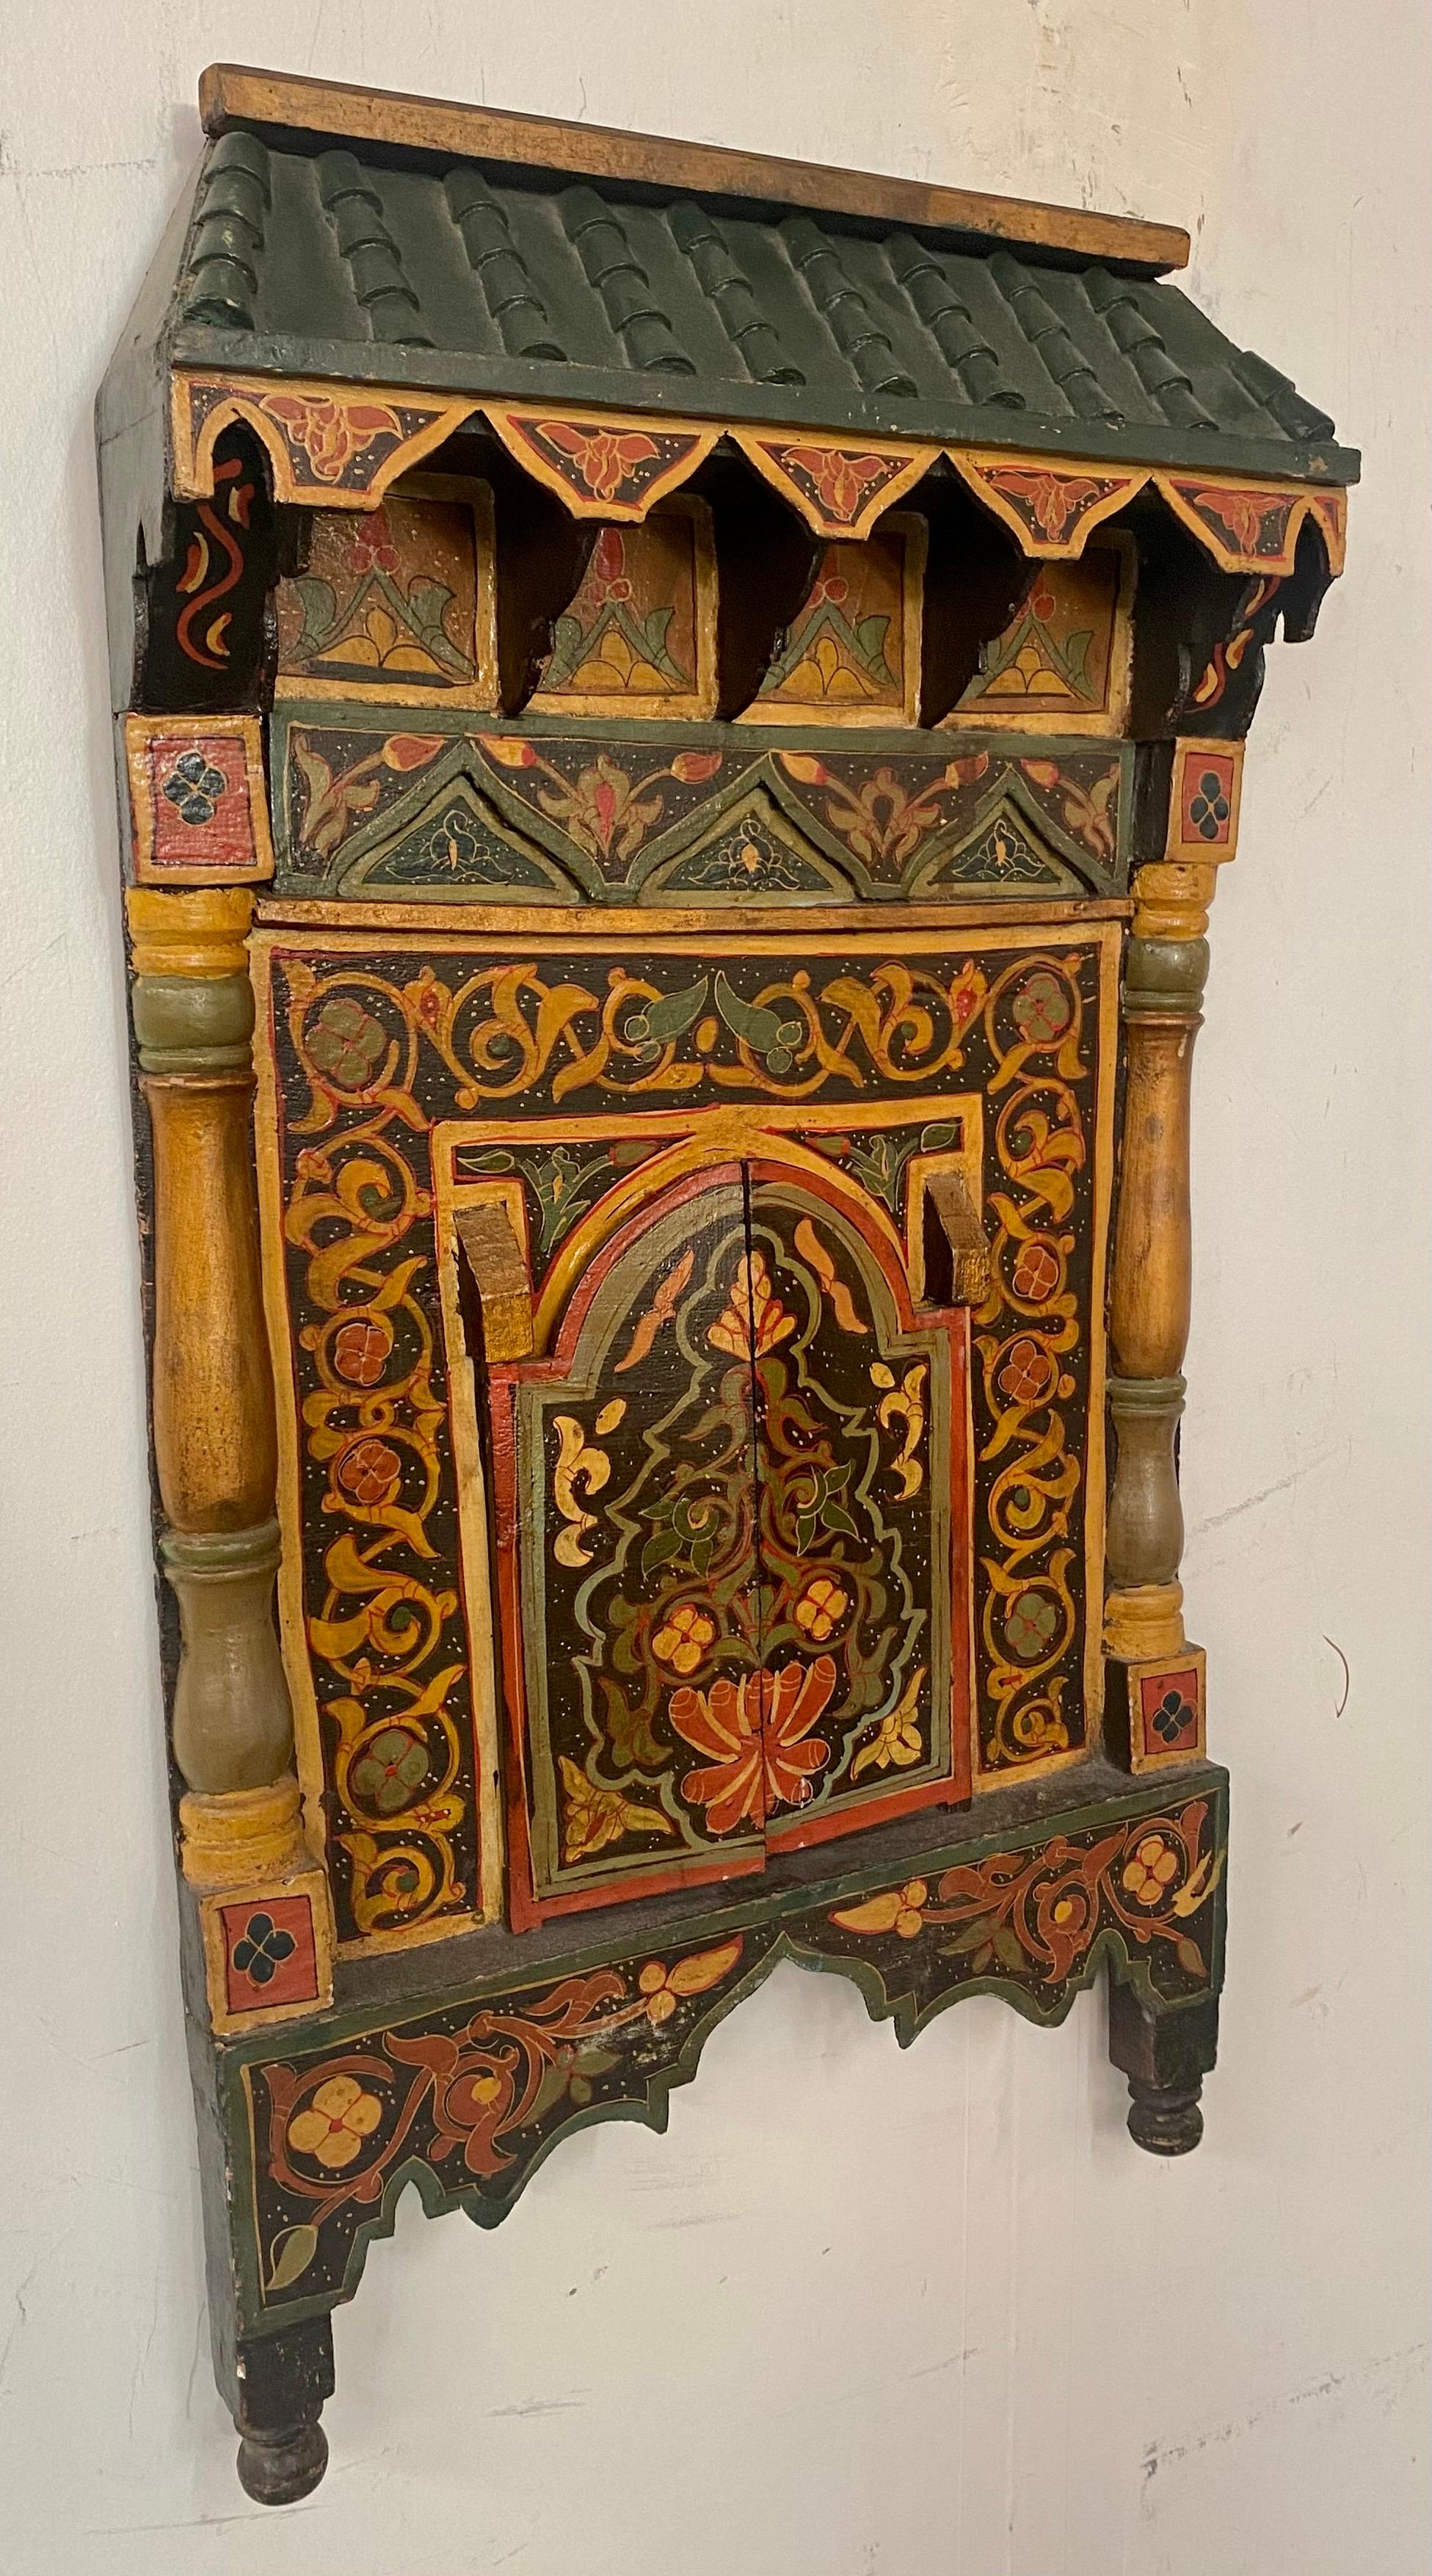 An antique Moroccan moorish hand painted and wood carved door design wall decor, sculpture or mirror frame. Featuring exotic and intricate geometrical motifs reminiscent of the glorious moorish architecture and style, the wall decor door style frame